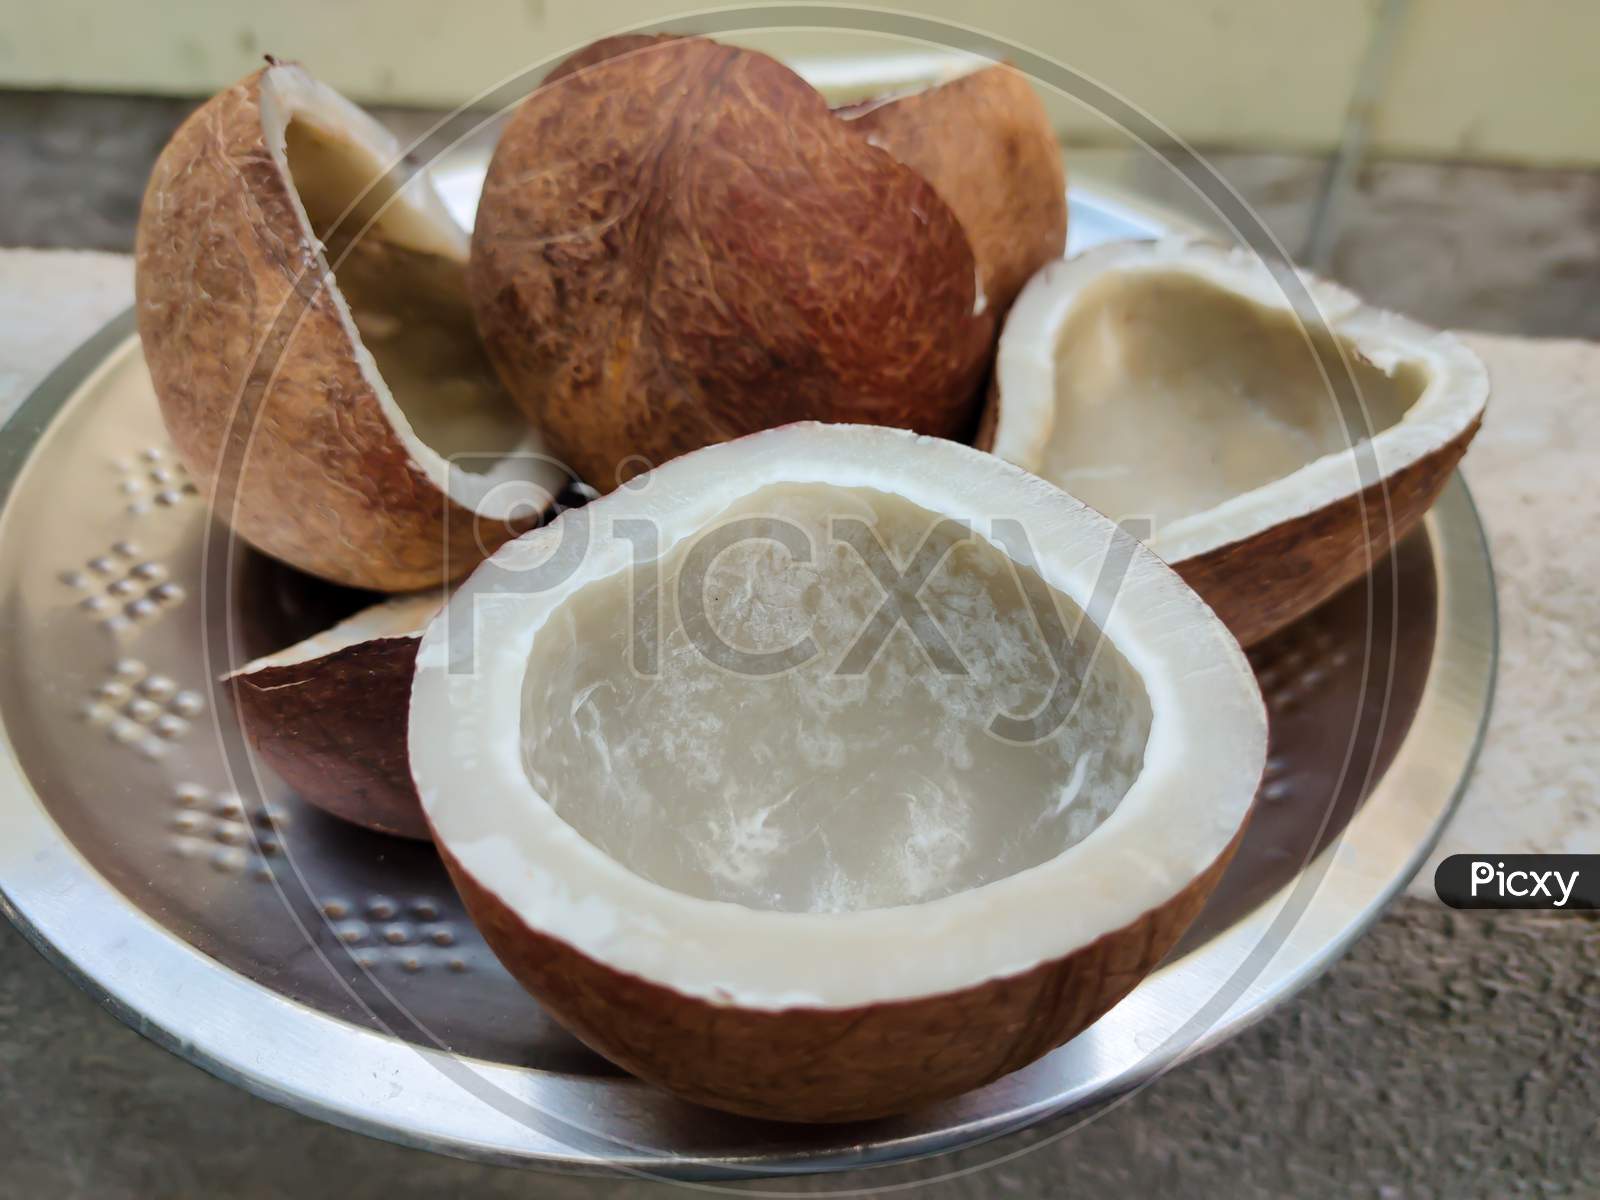 Brown dry coconut on the plate